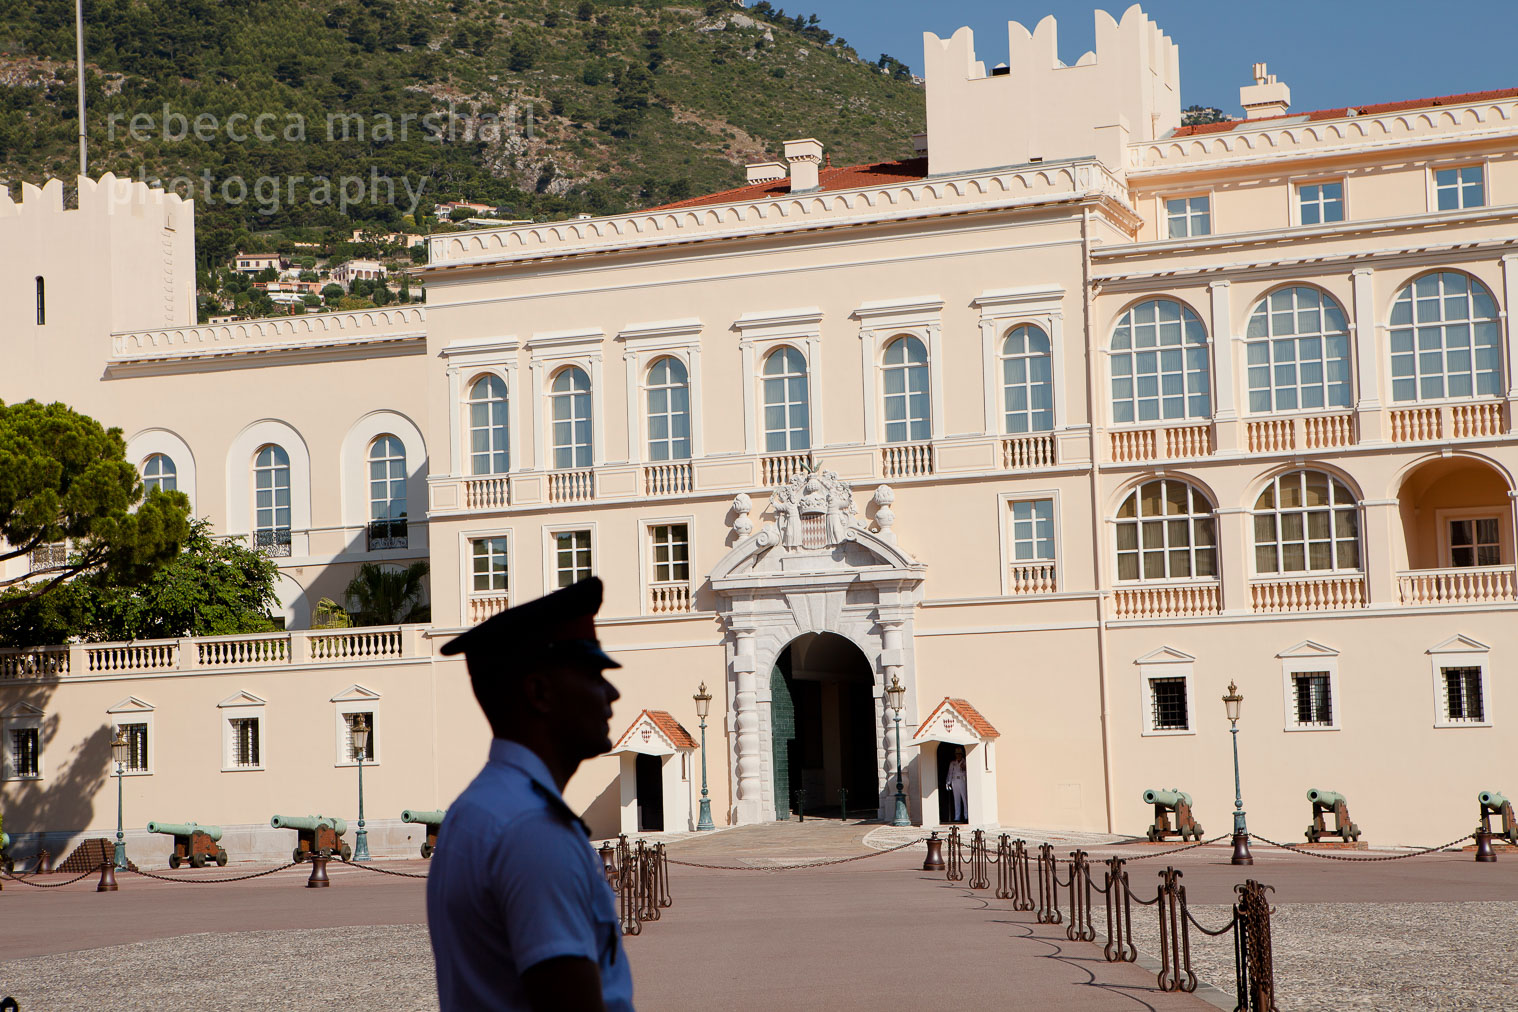 A carabinier standing guard in front of the Prince's Palace, Monaco